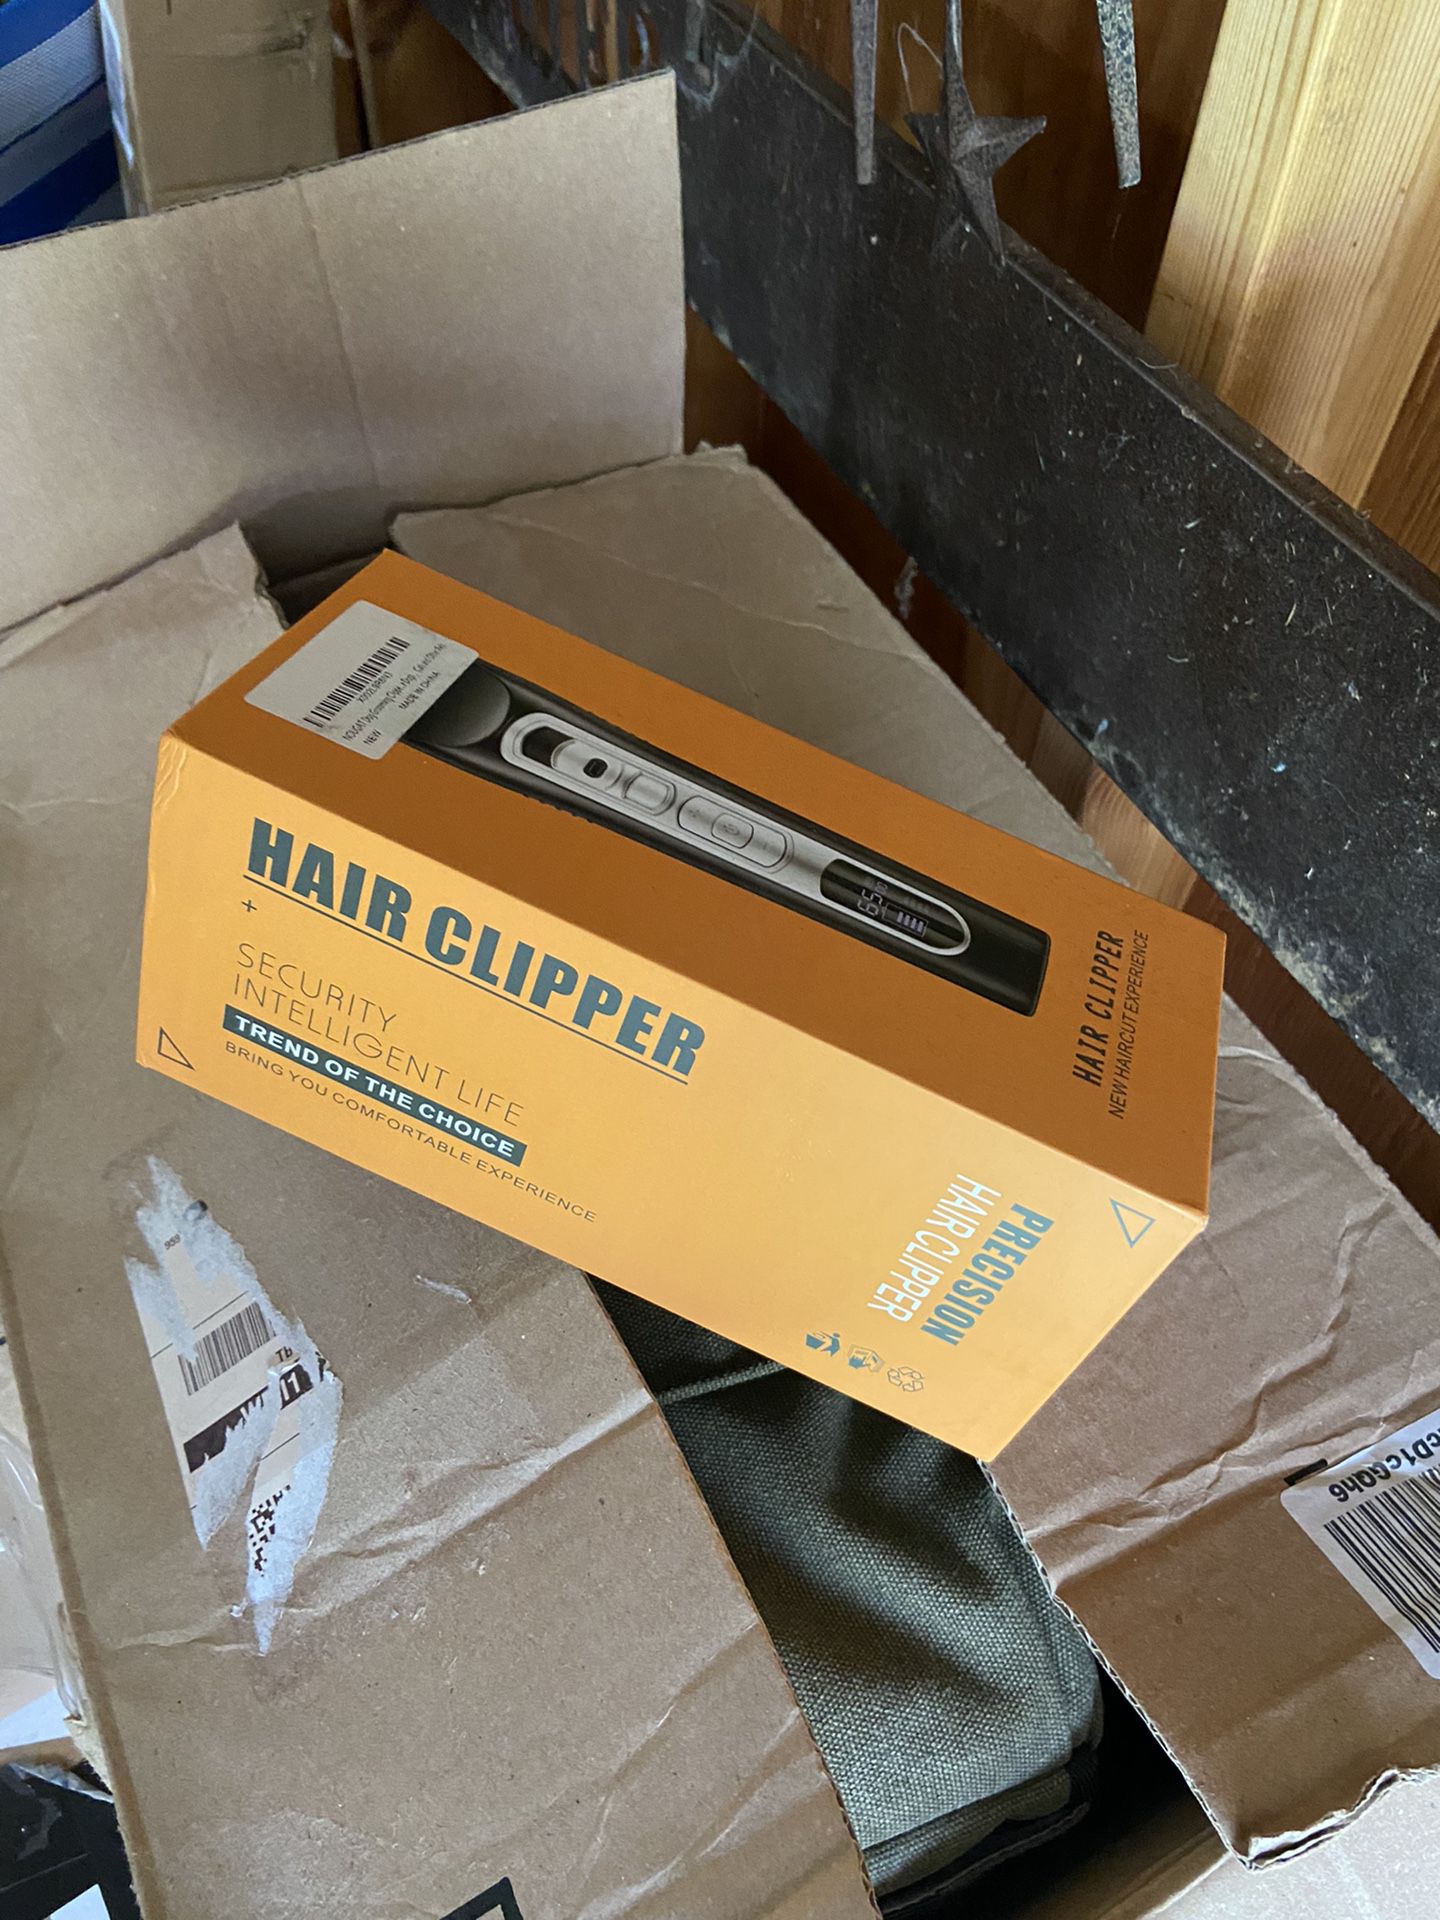 Dog Grooming Clippers